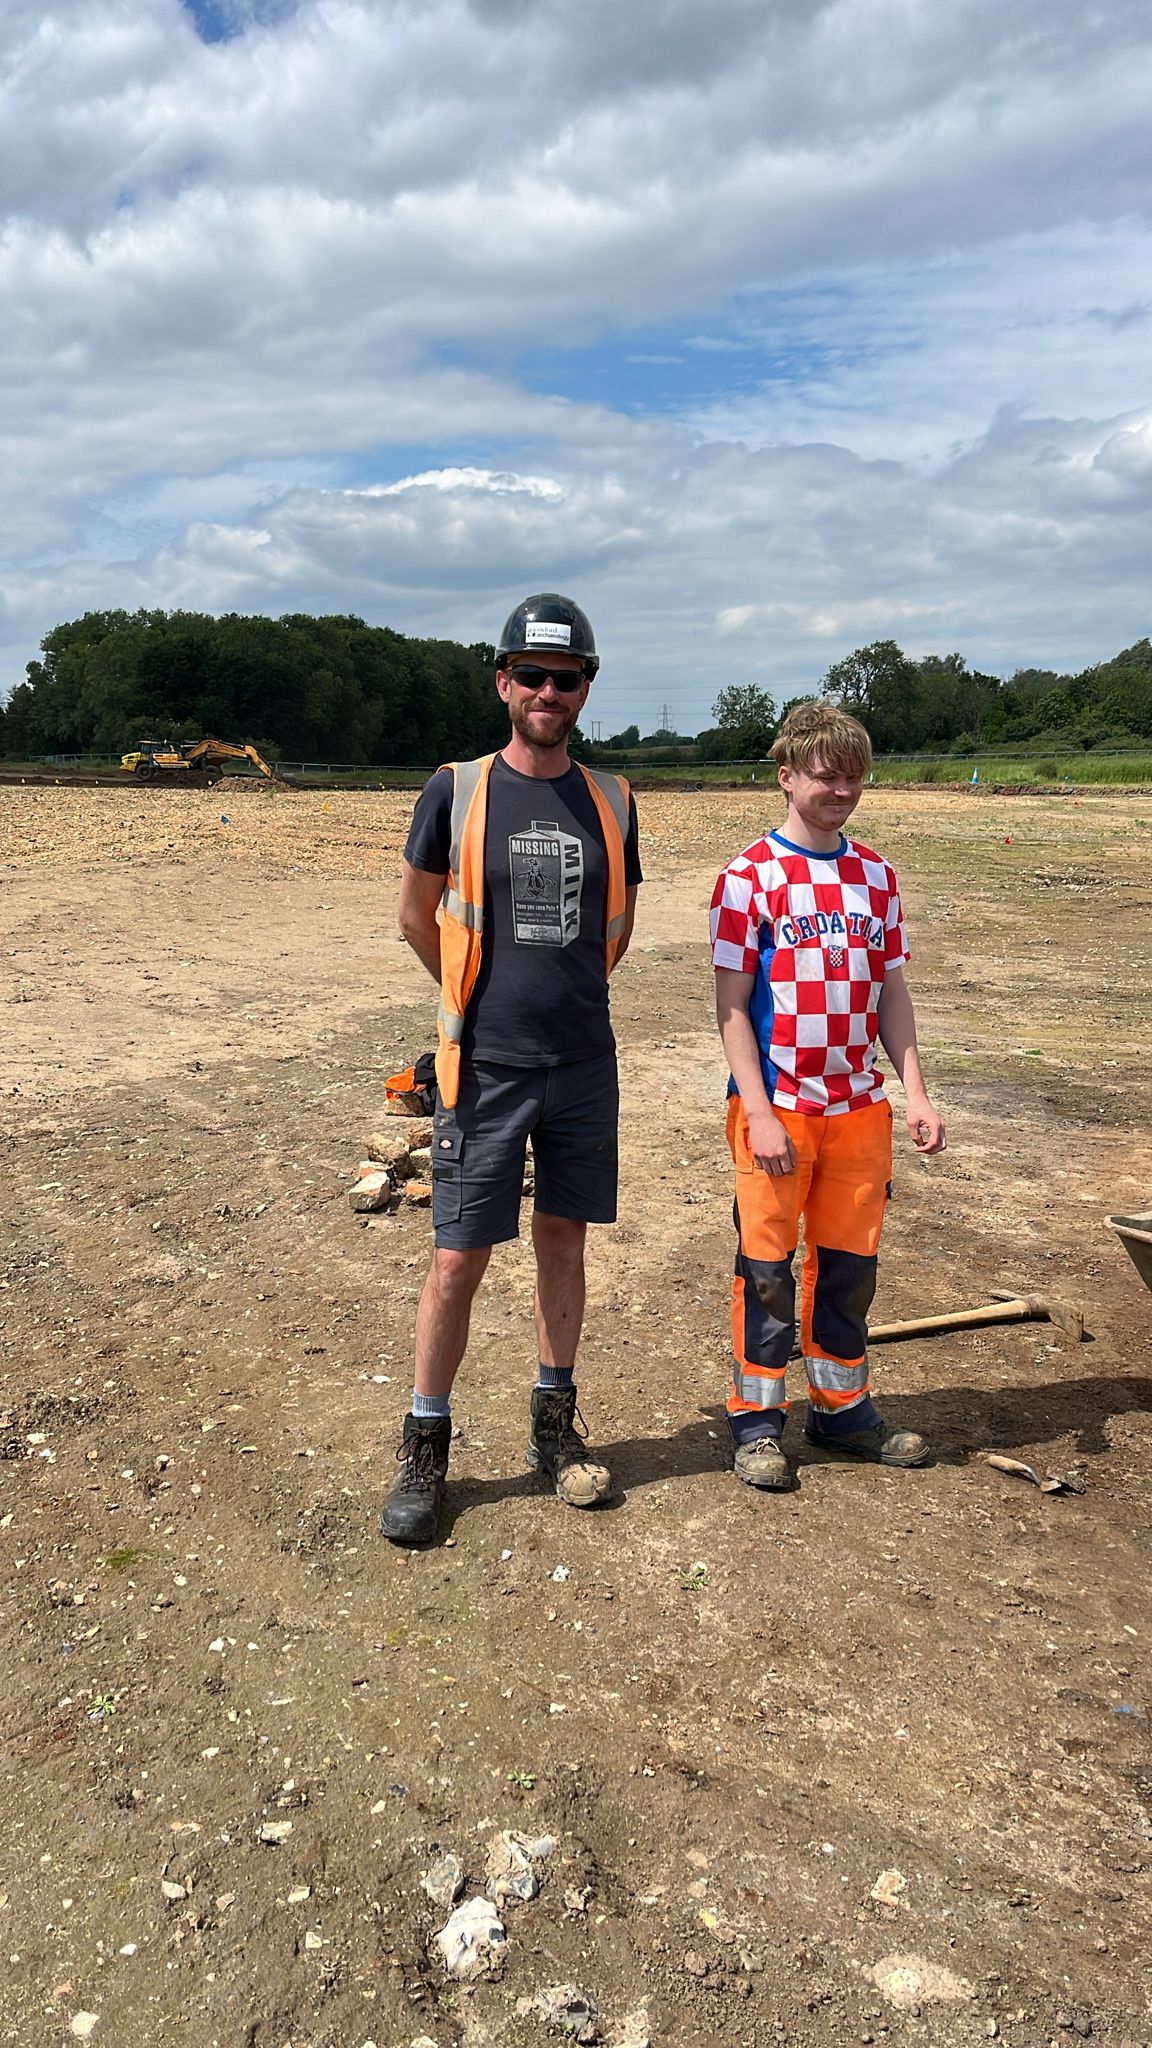 Two archaeologists are on site in shorts and short-sleeved tops.